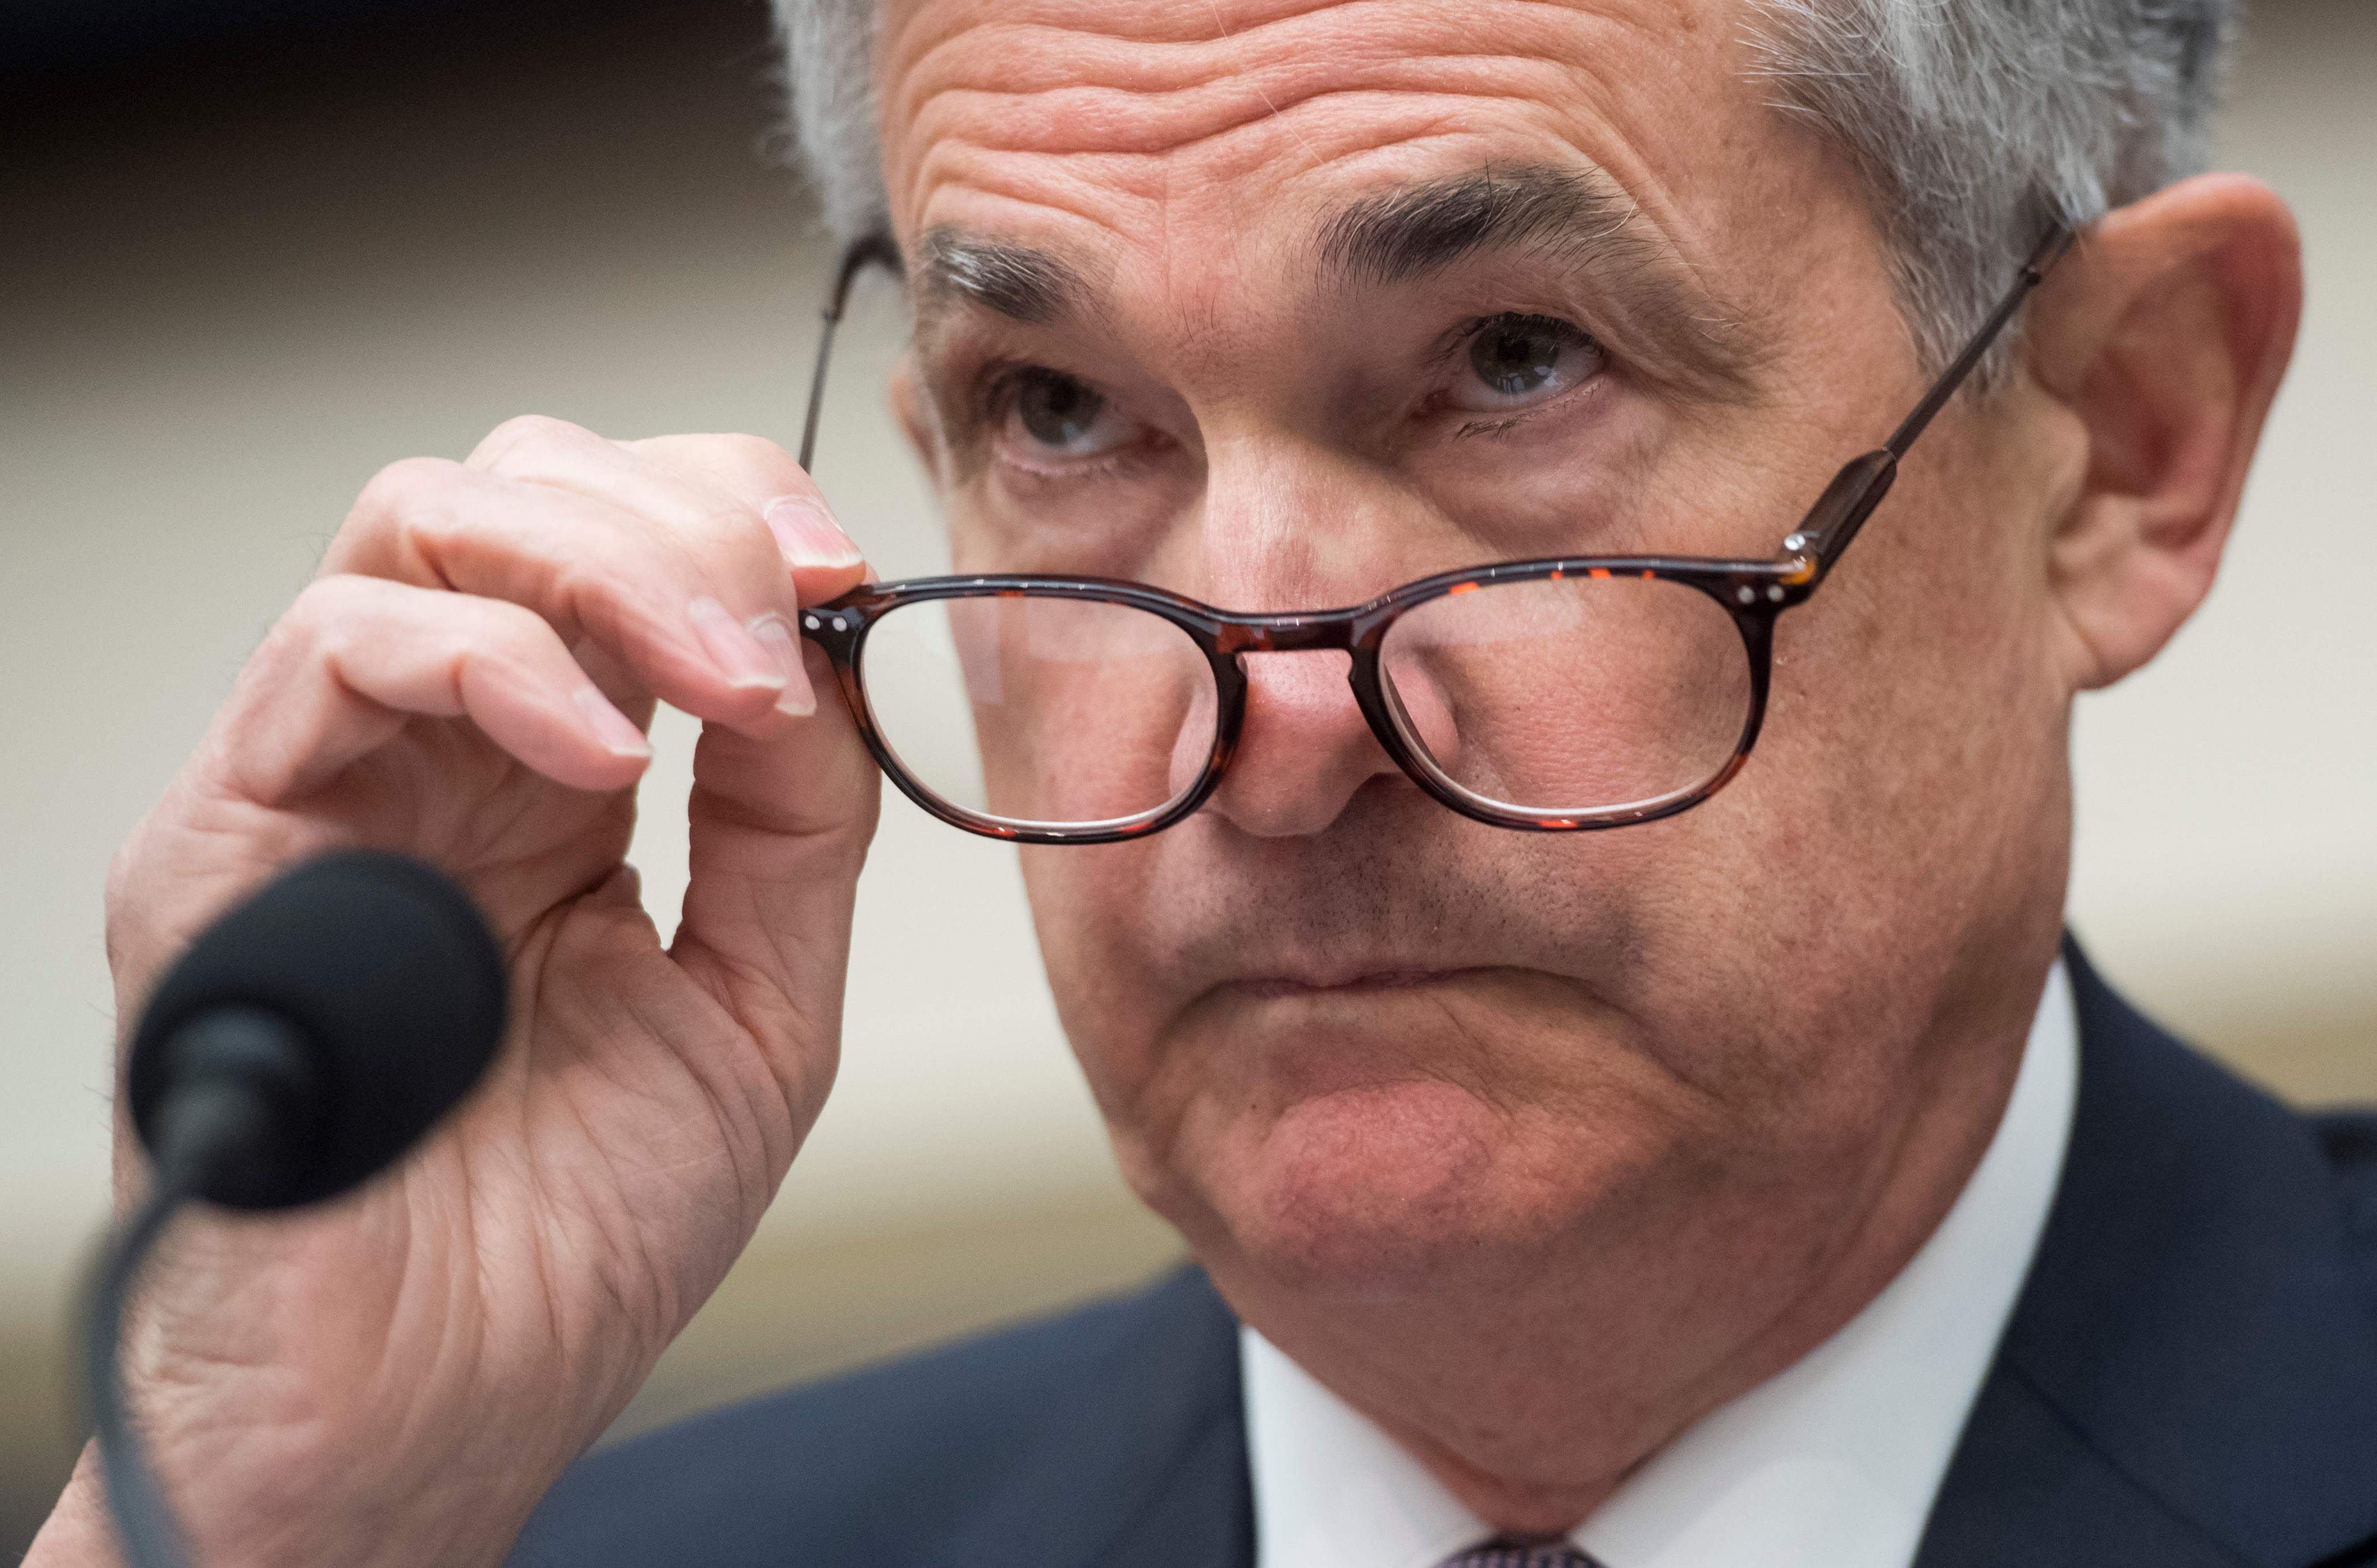 Fed's low confidence signals recession